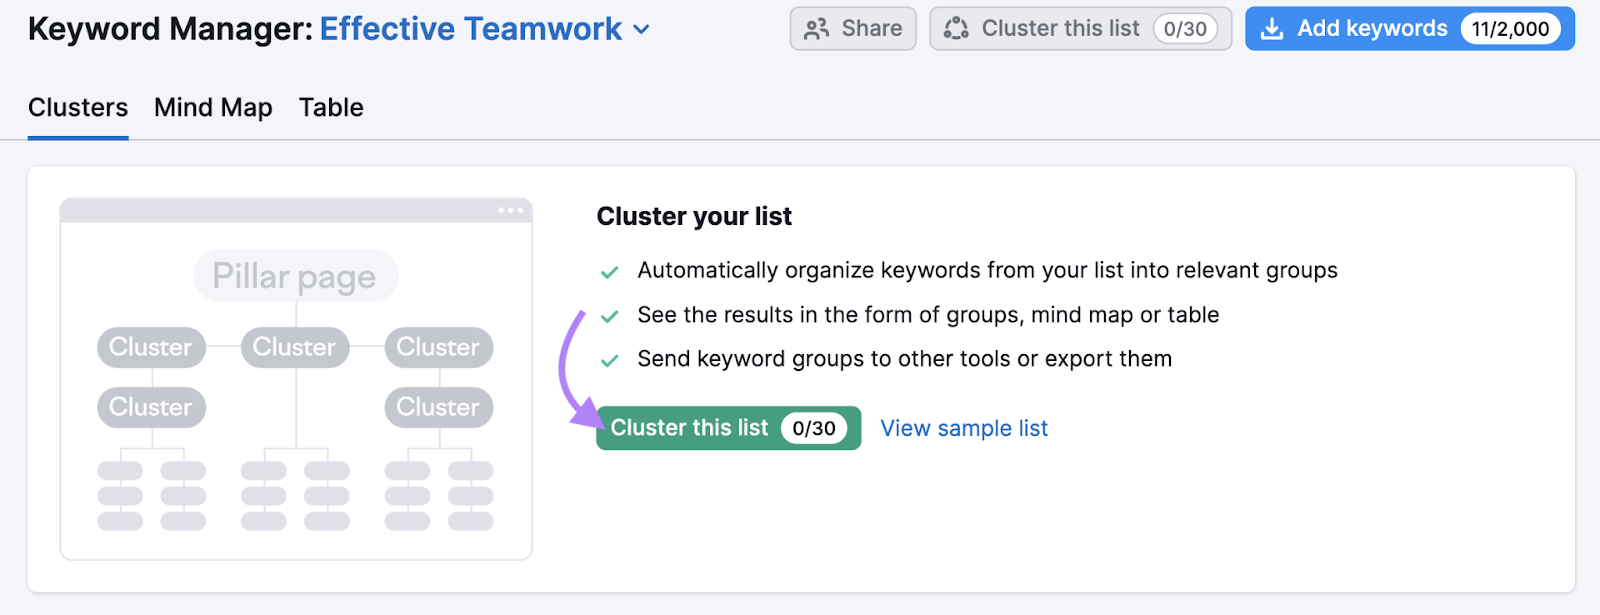 “Cluster this list" button selected